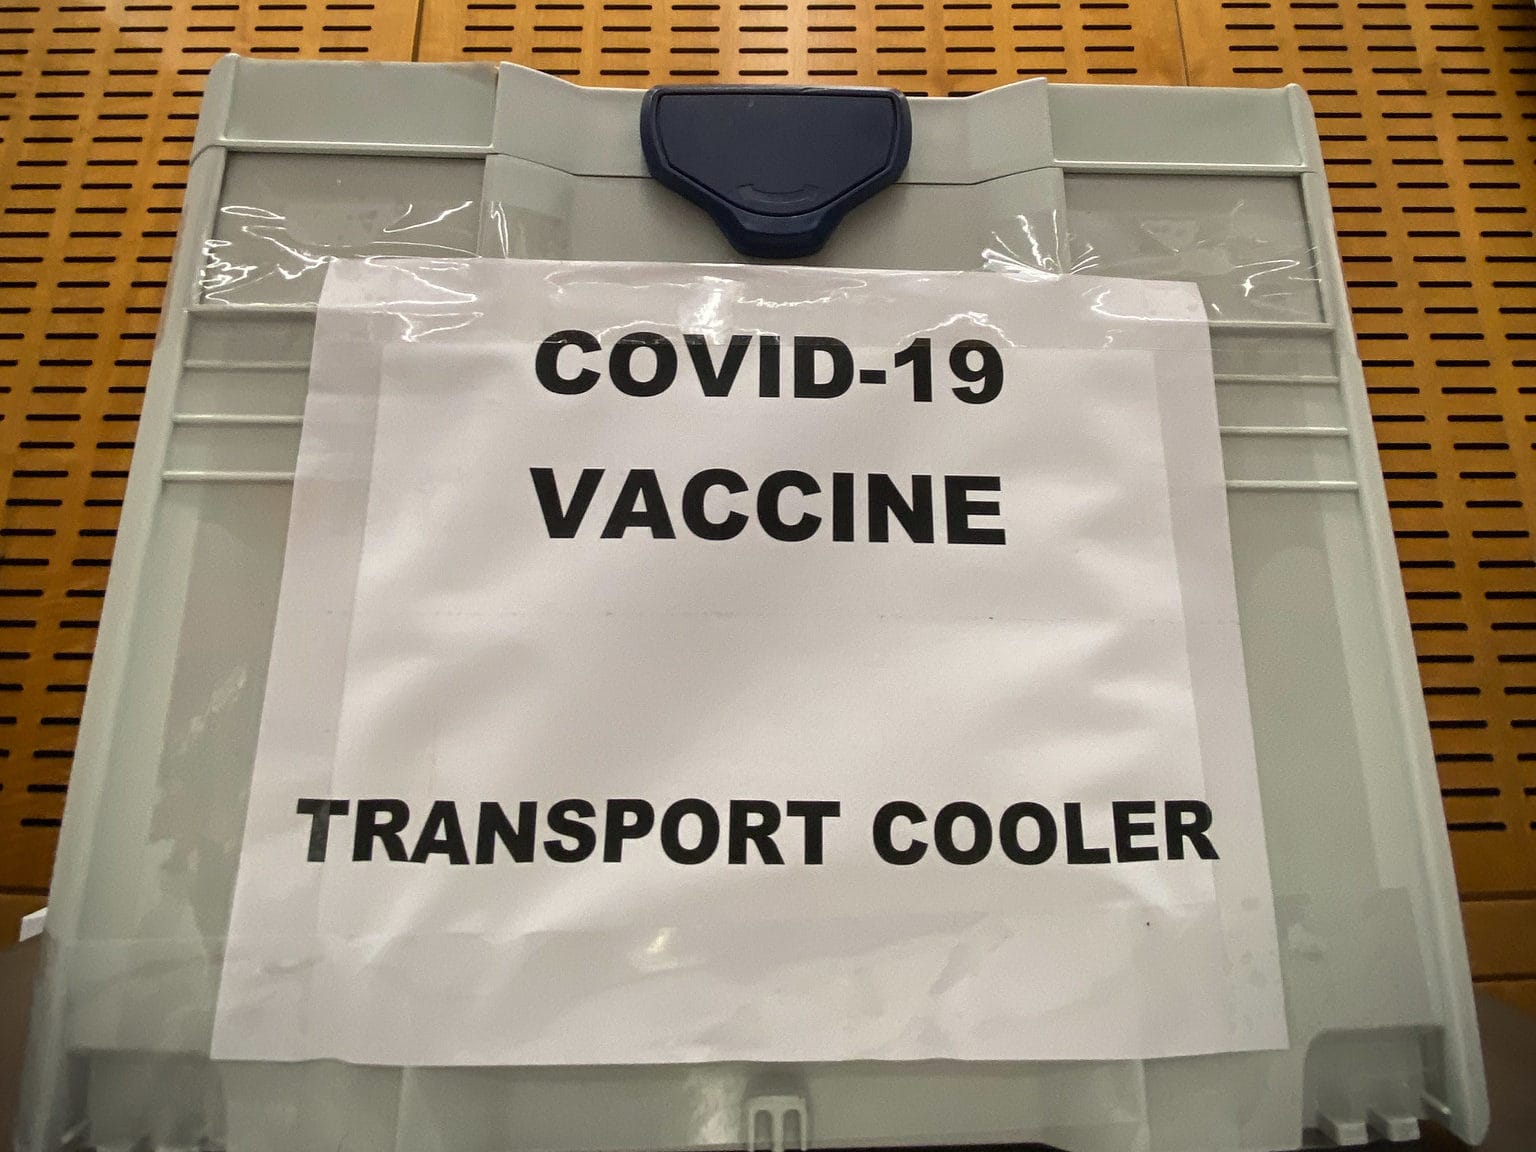 Brooklyn Covid-19 Update: The Vaccine Is Here, Indoor Dining No More, Get Ready For Full Shutdown